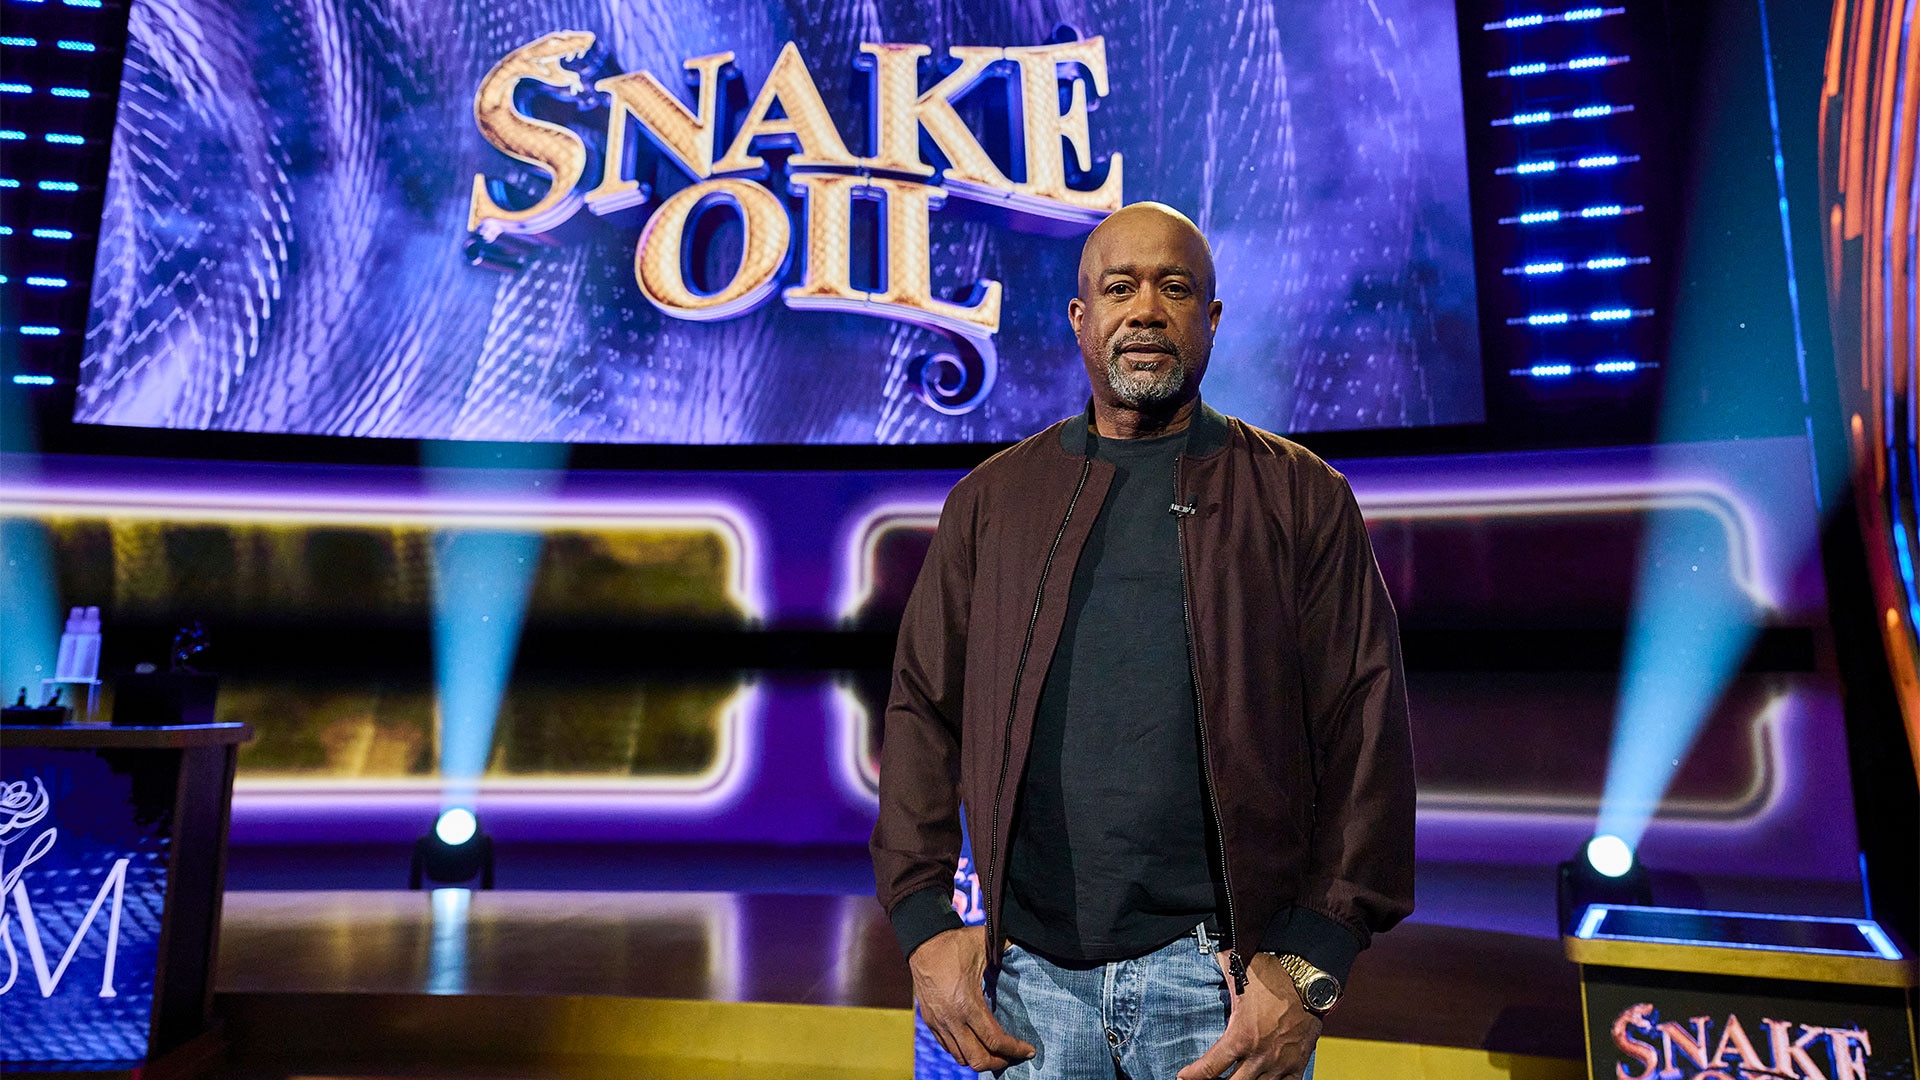 Snake Oil: next episode, host and everything we know